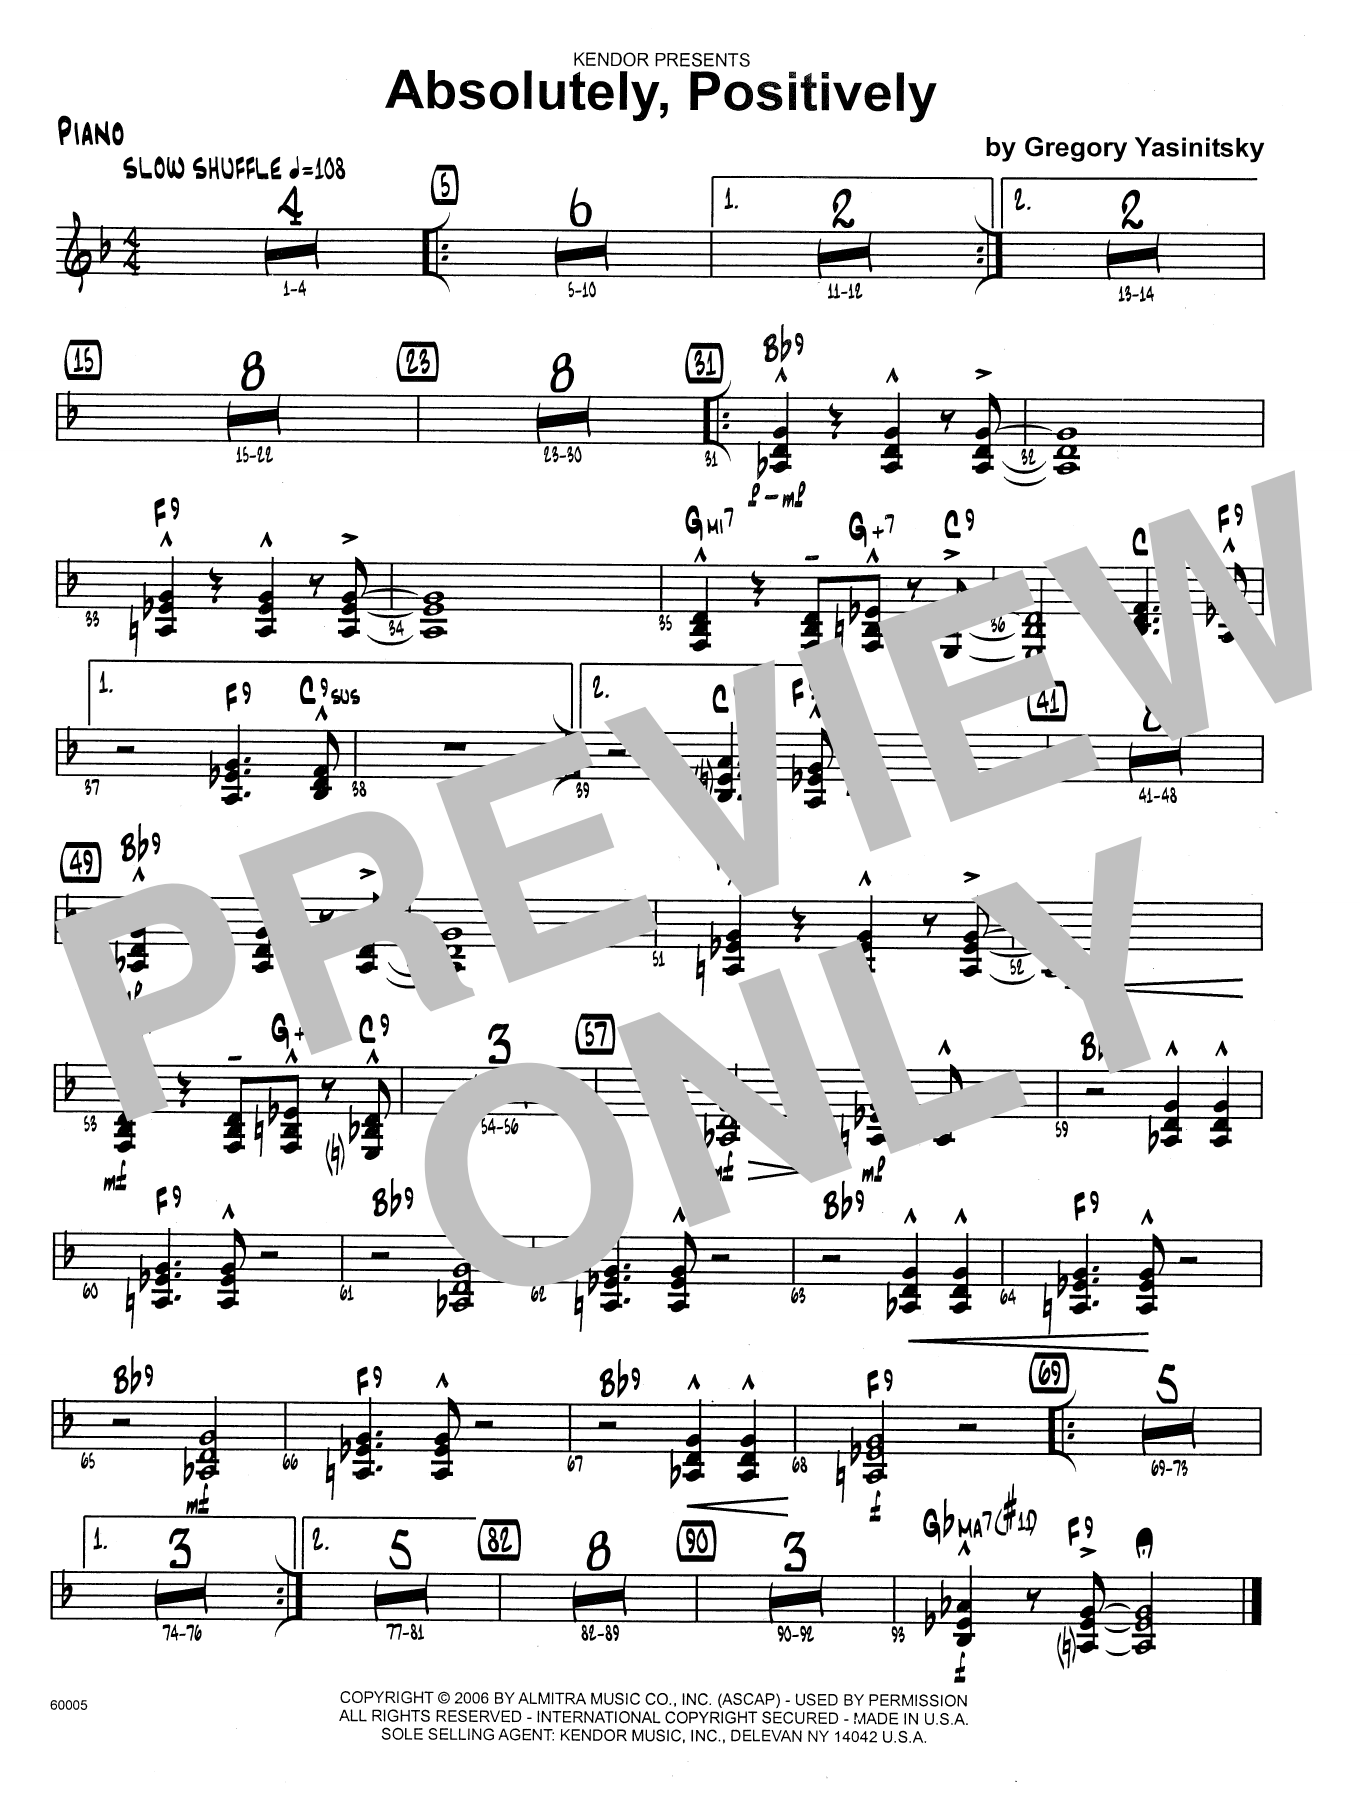 Download Gregory Yasinitsky Absolutely, Positively - Piano Sheet Music